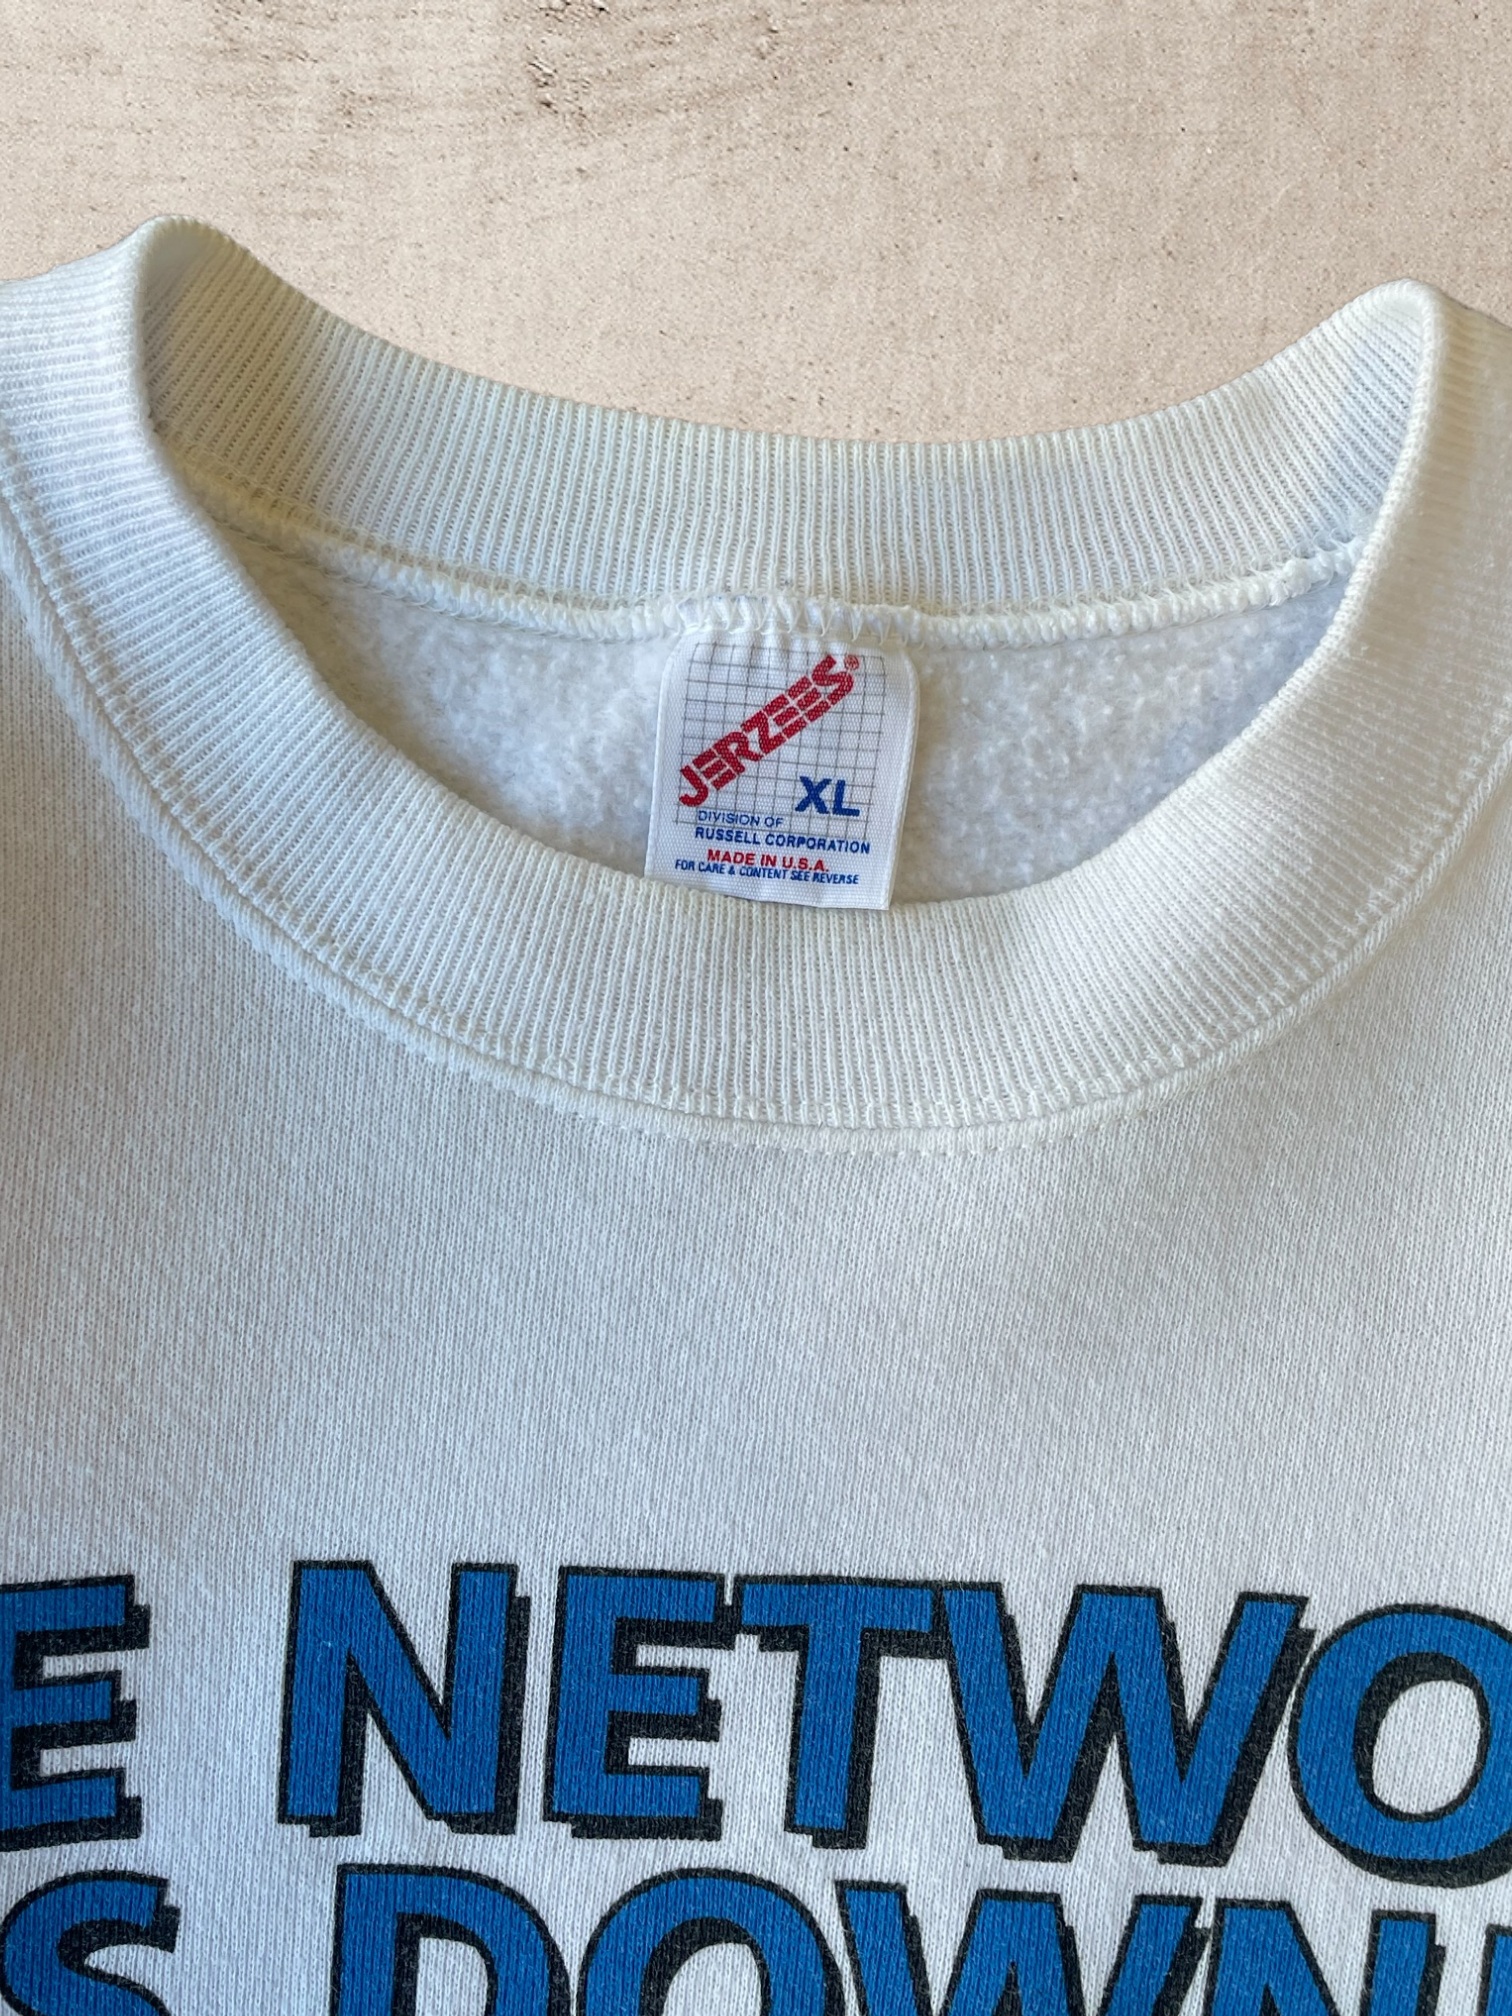 90s The Network is Down Crewneck - X-Large